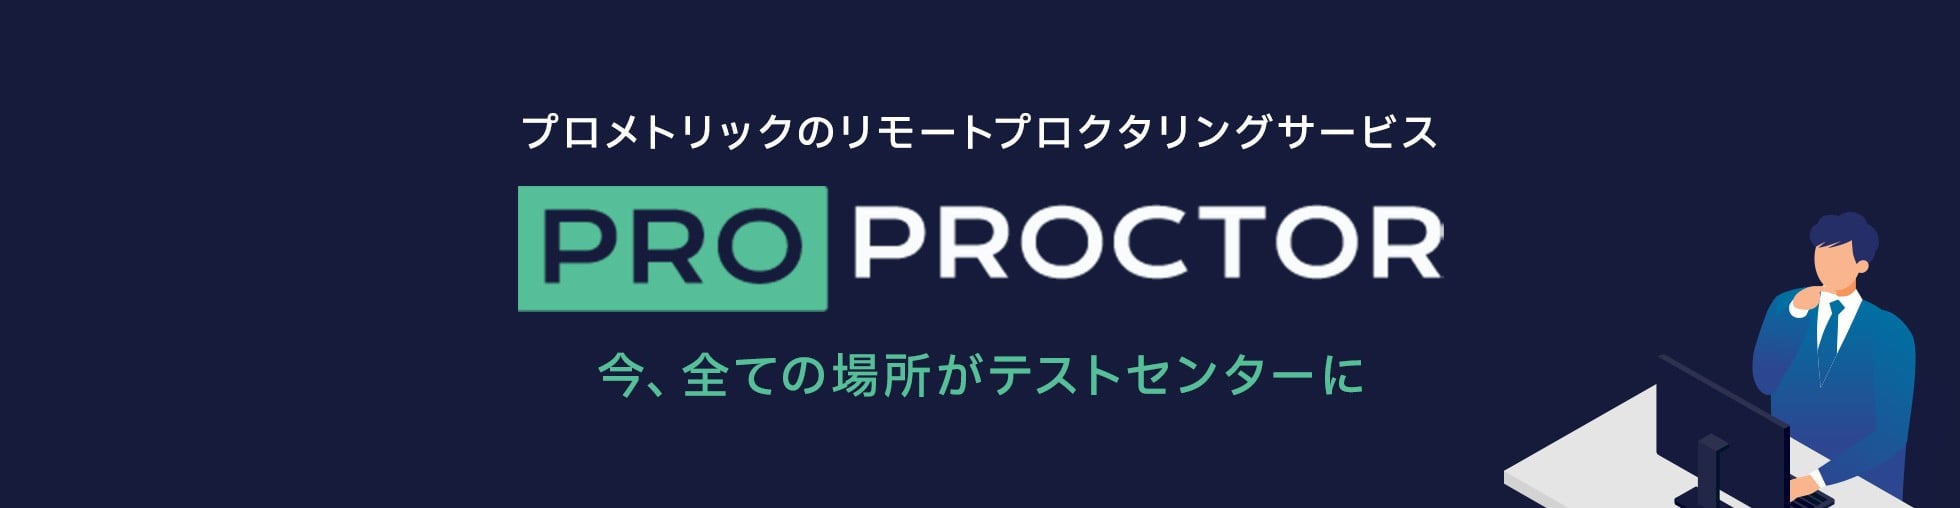 Prometric 's remote proctoring service ProProctor Now every location is a test center